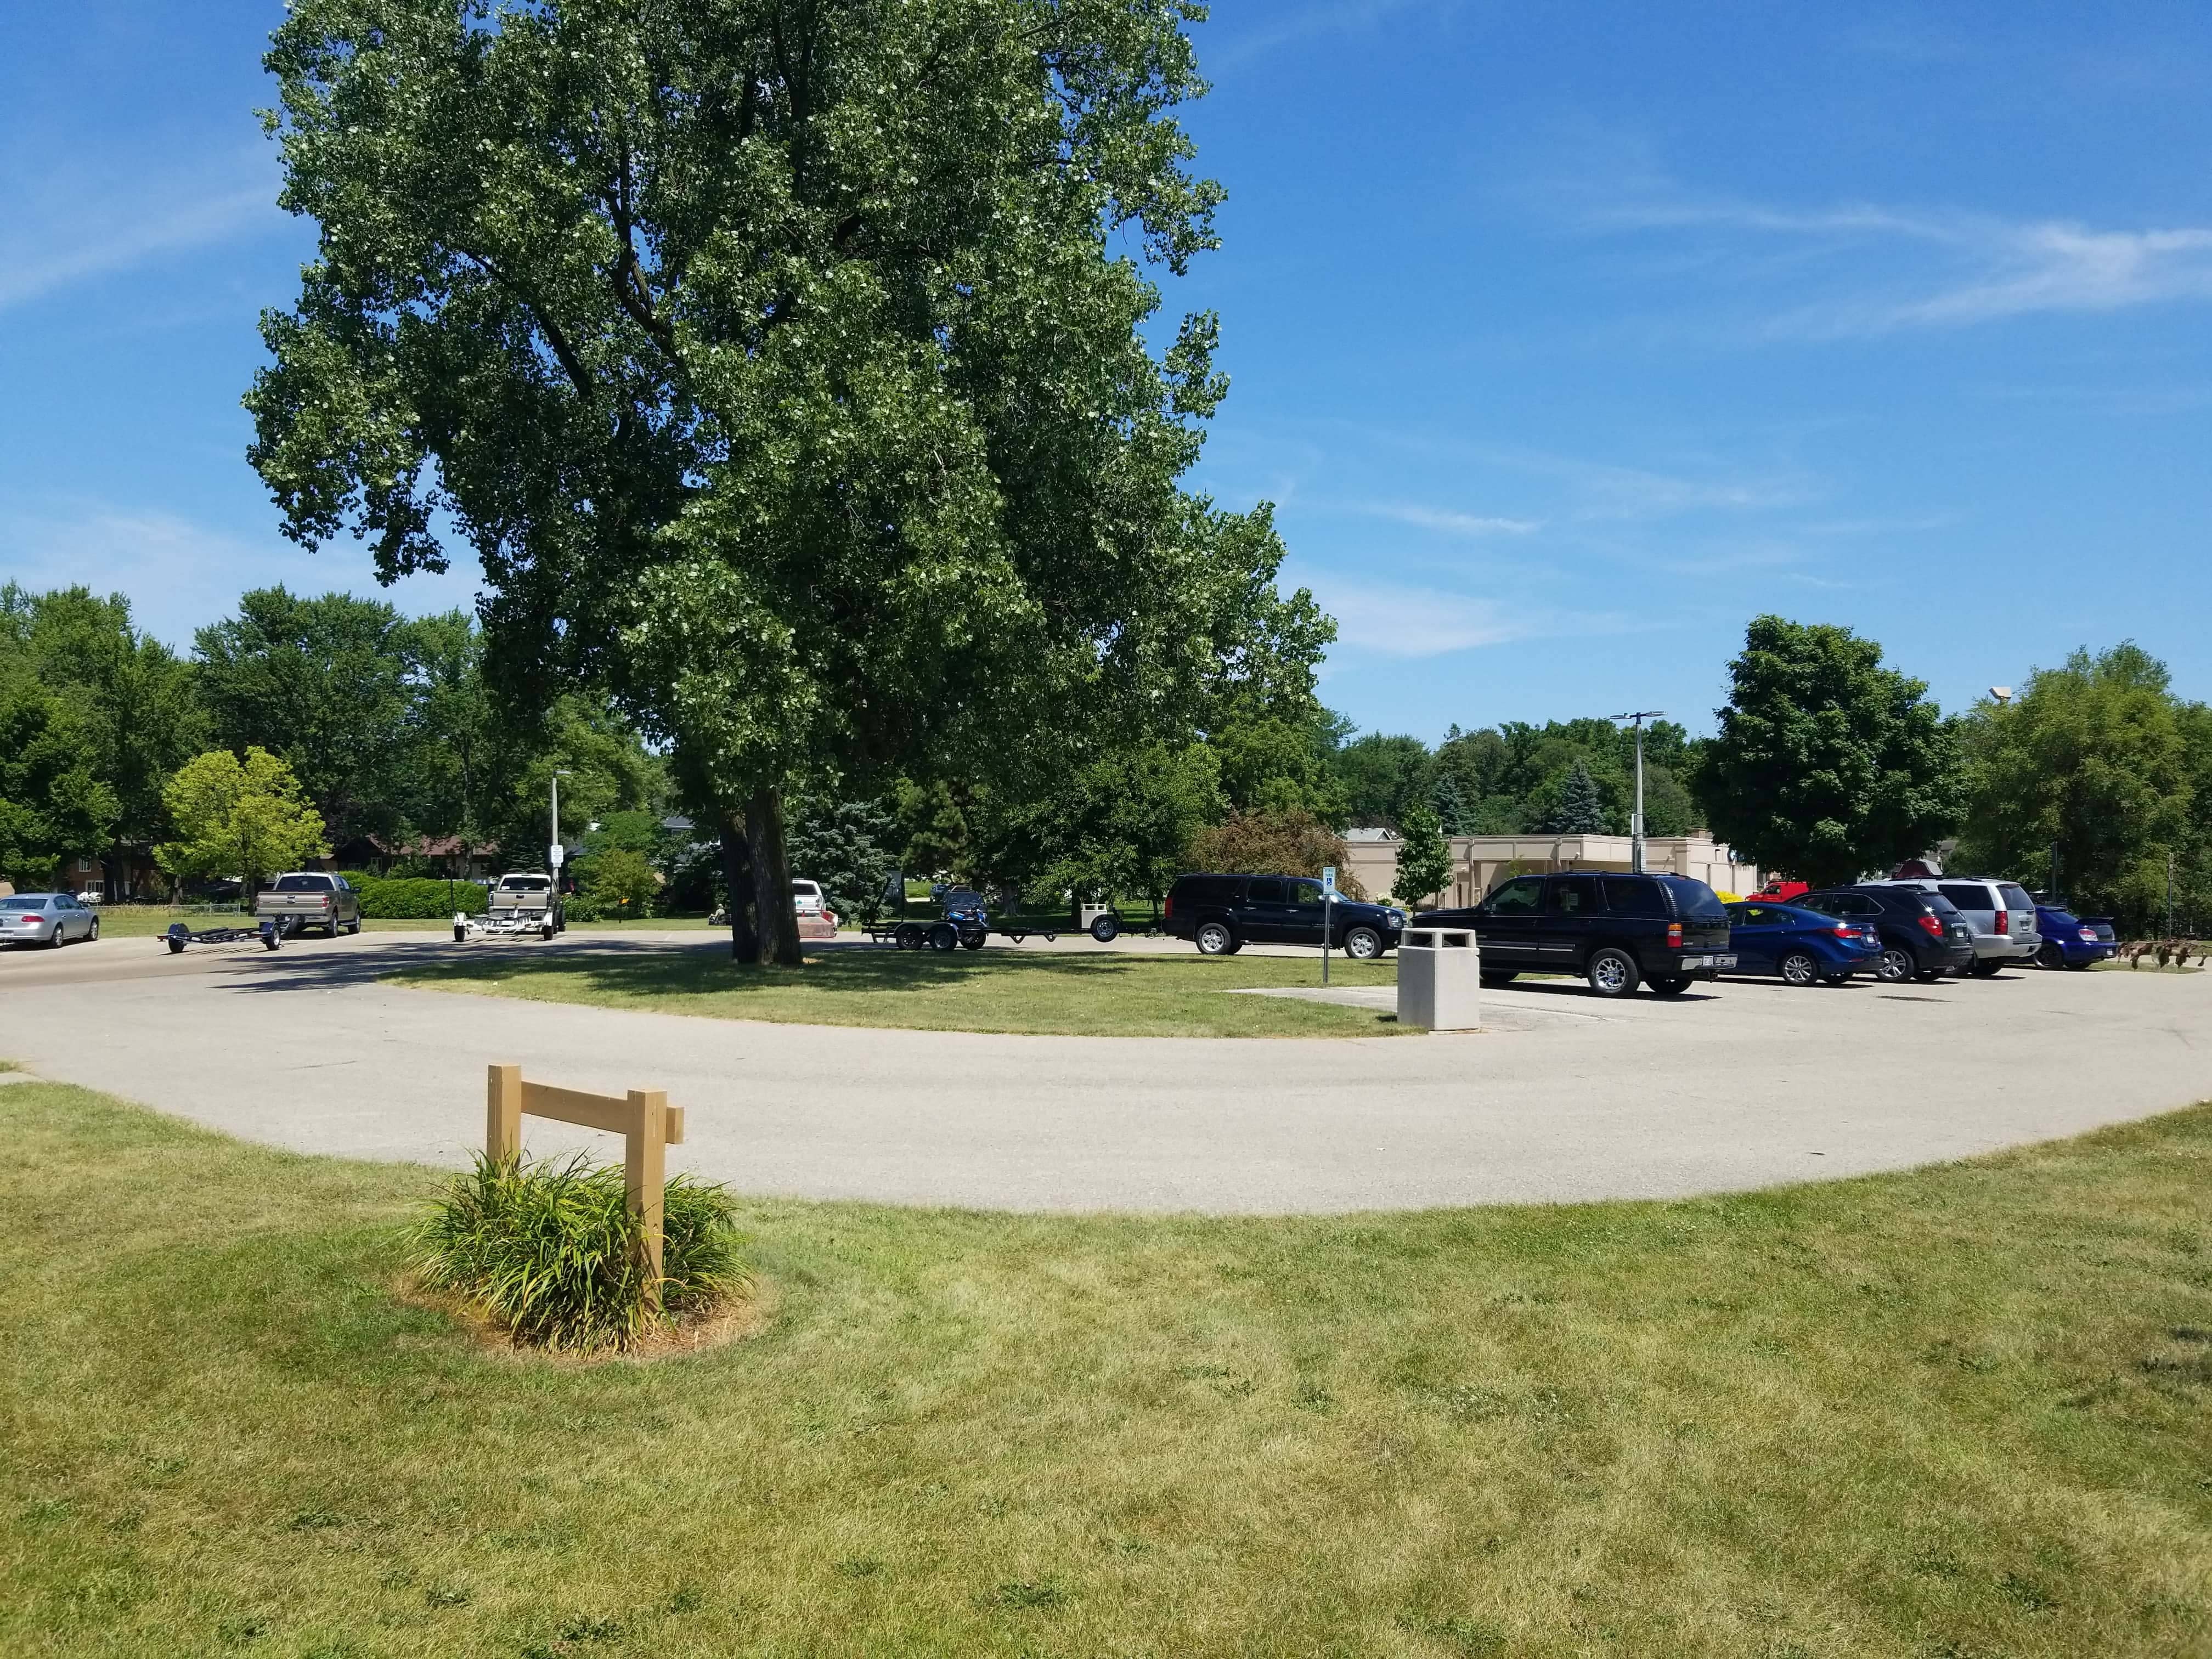 Janesville City Council to discuss another move for homeless parking